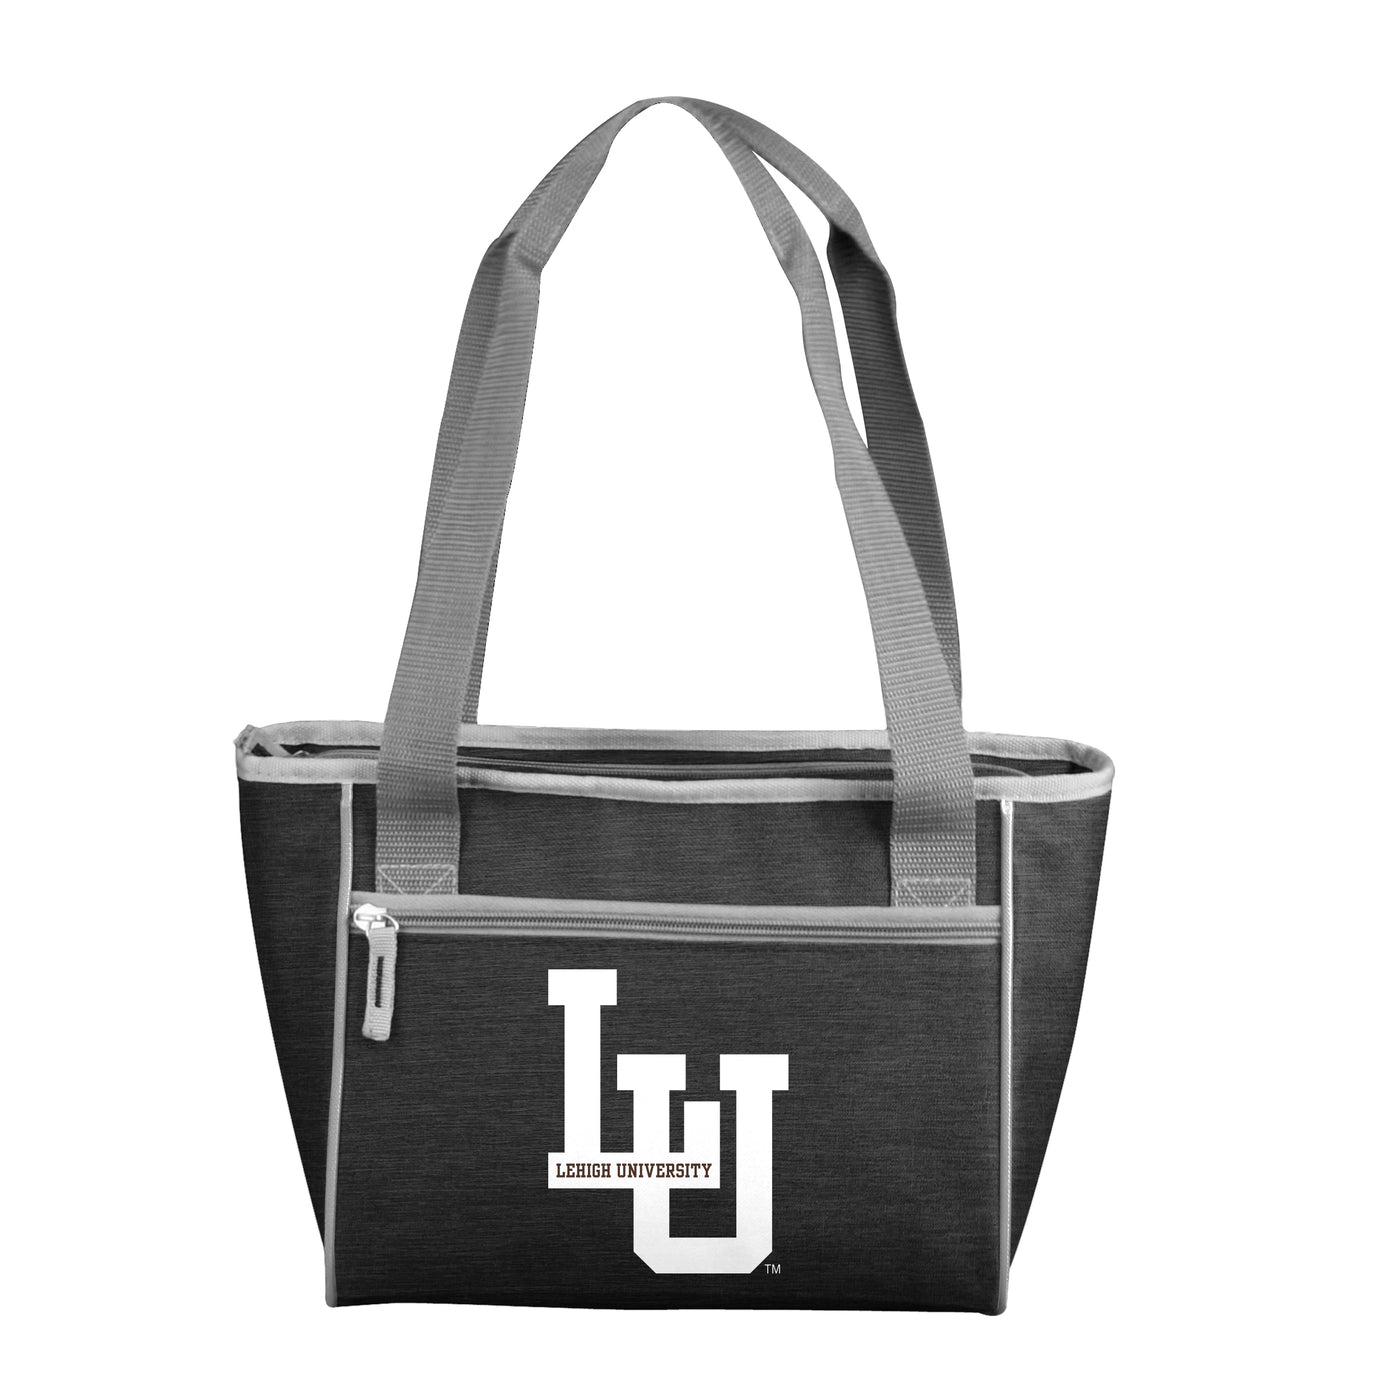 Lehigh 16 Can Cooler Tote